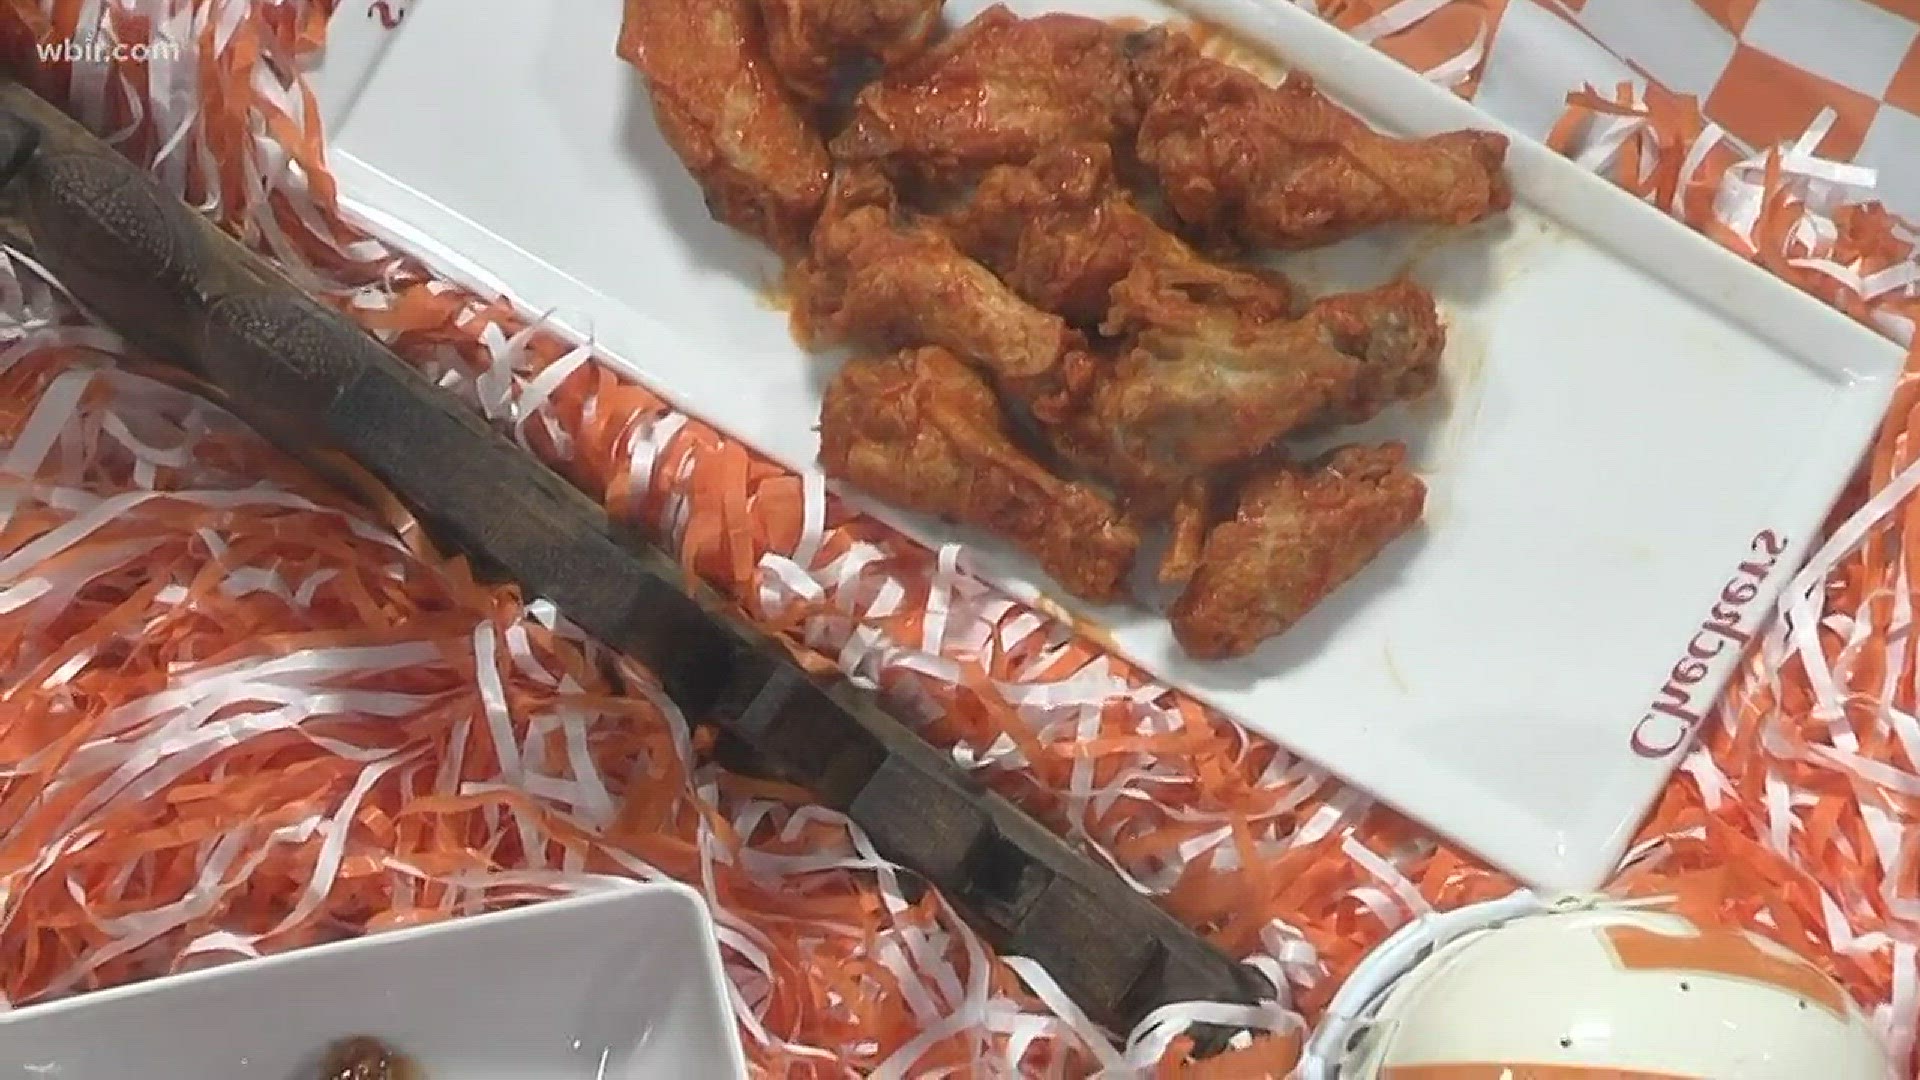 Checkers shares how to make the best burger, wings and hot dogs for gameday.